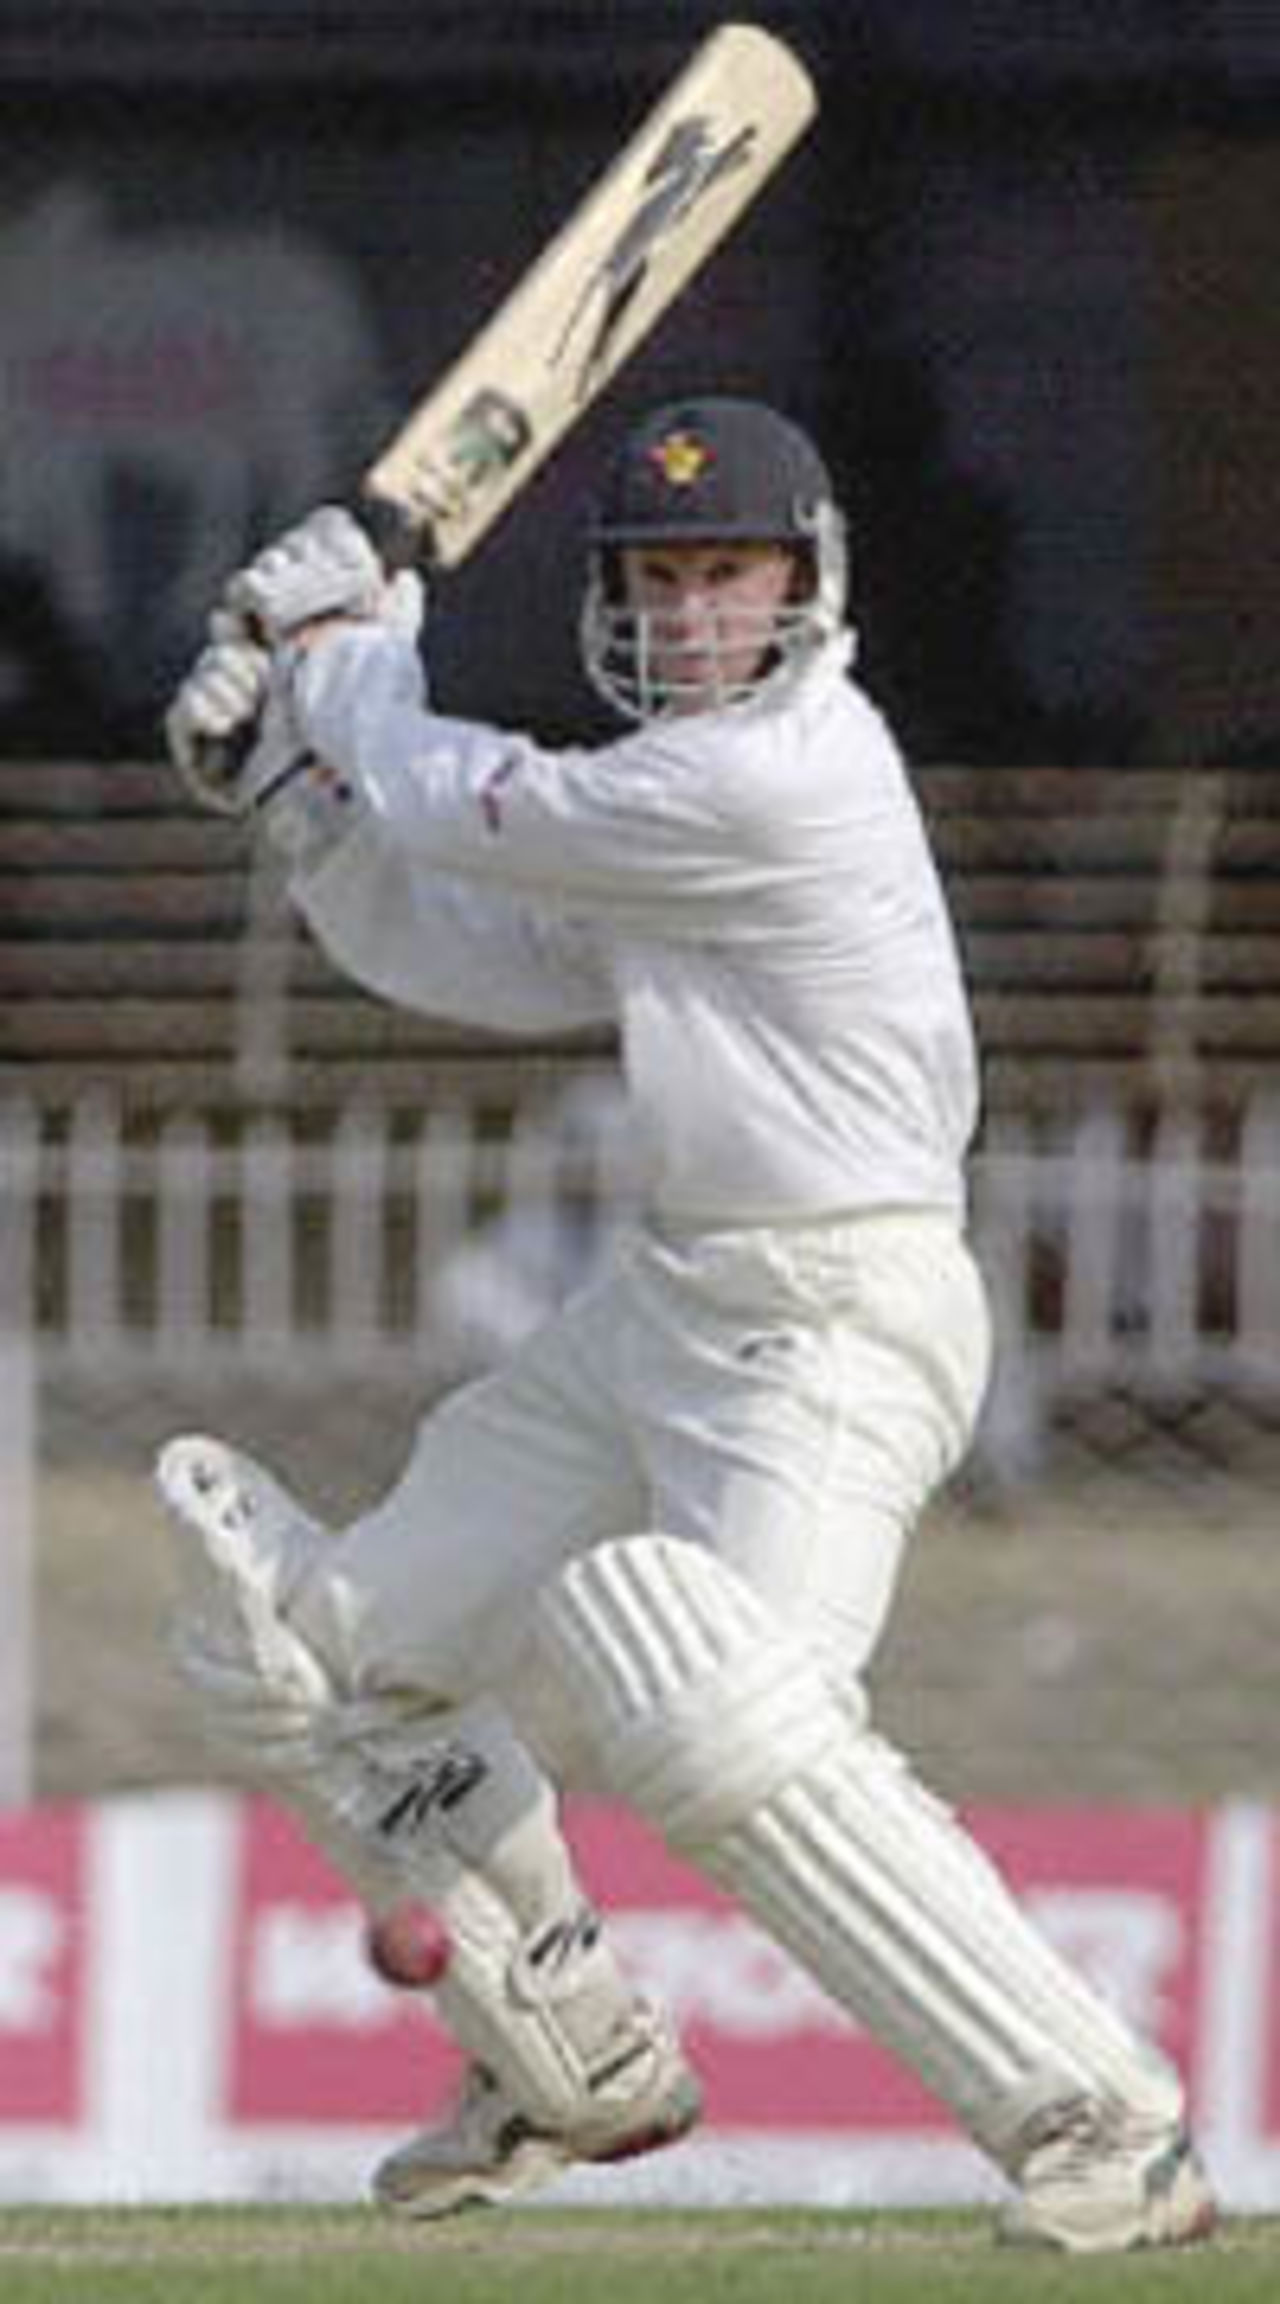 Andy Flower cuts a Joshi delivery during his double century knock, Zimbabwe in India, 2000/01, 2nd Test, India v Zimbabwe, Vidarbha C.A. Ground, Nagpur, 25-29 November 2000 (Day 5).